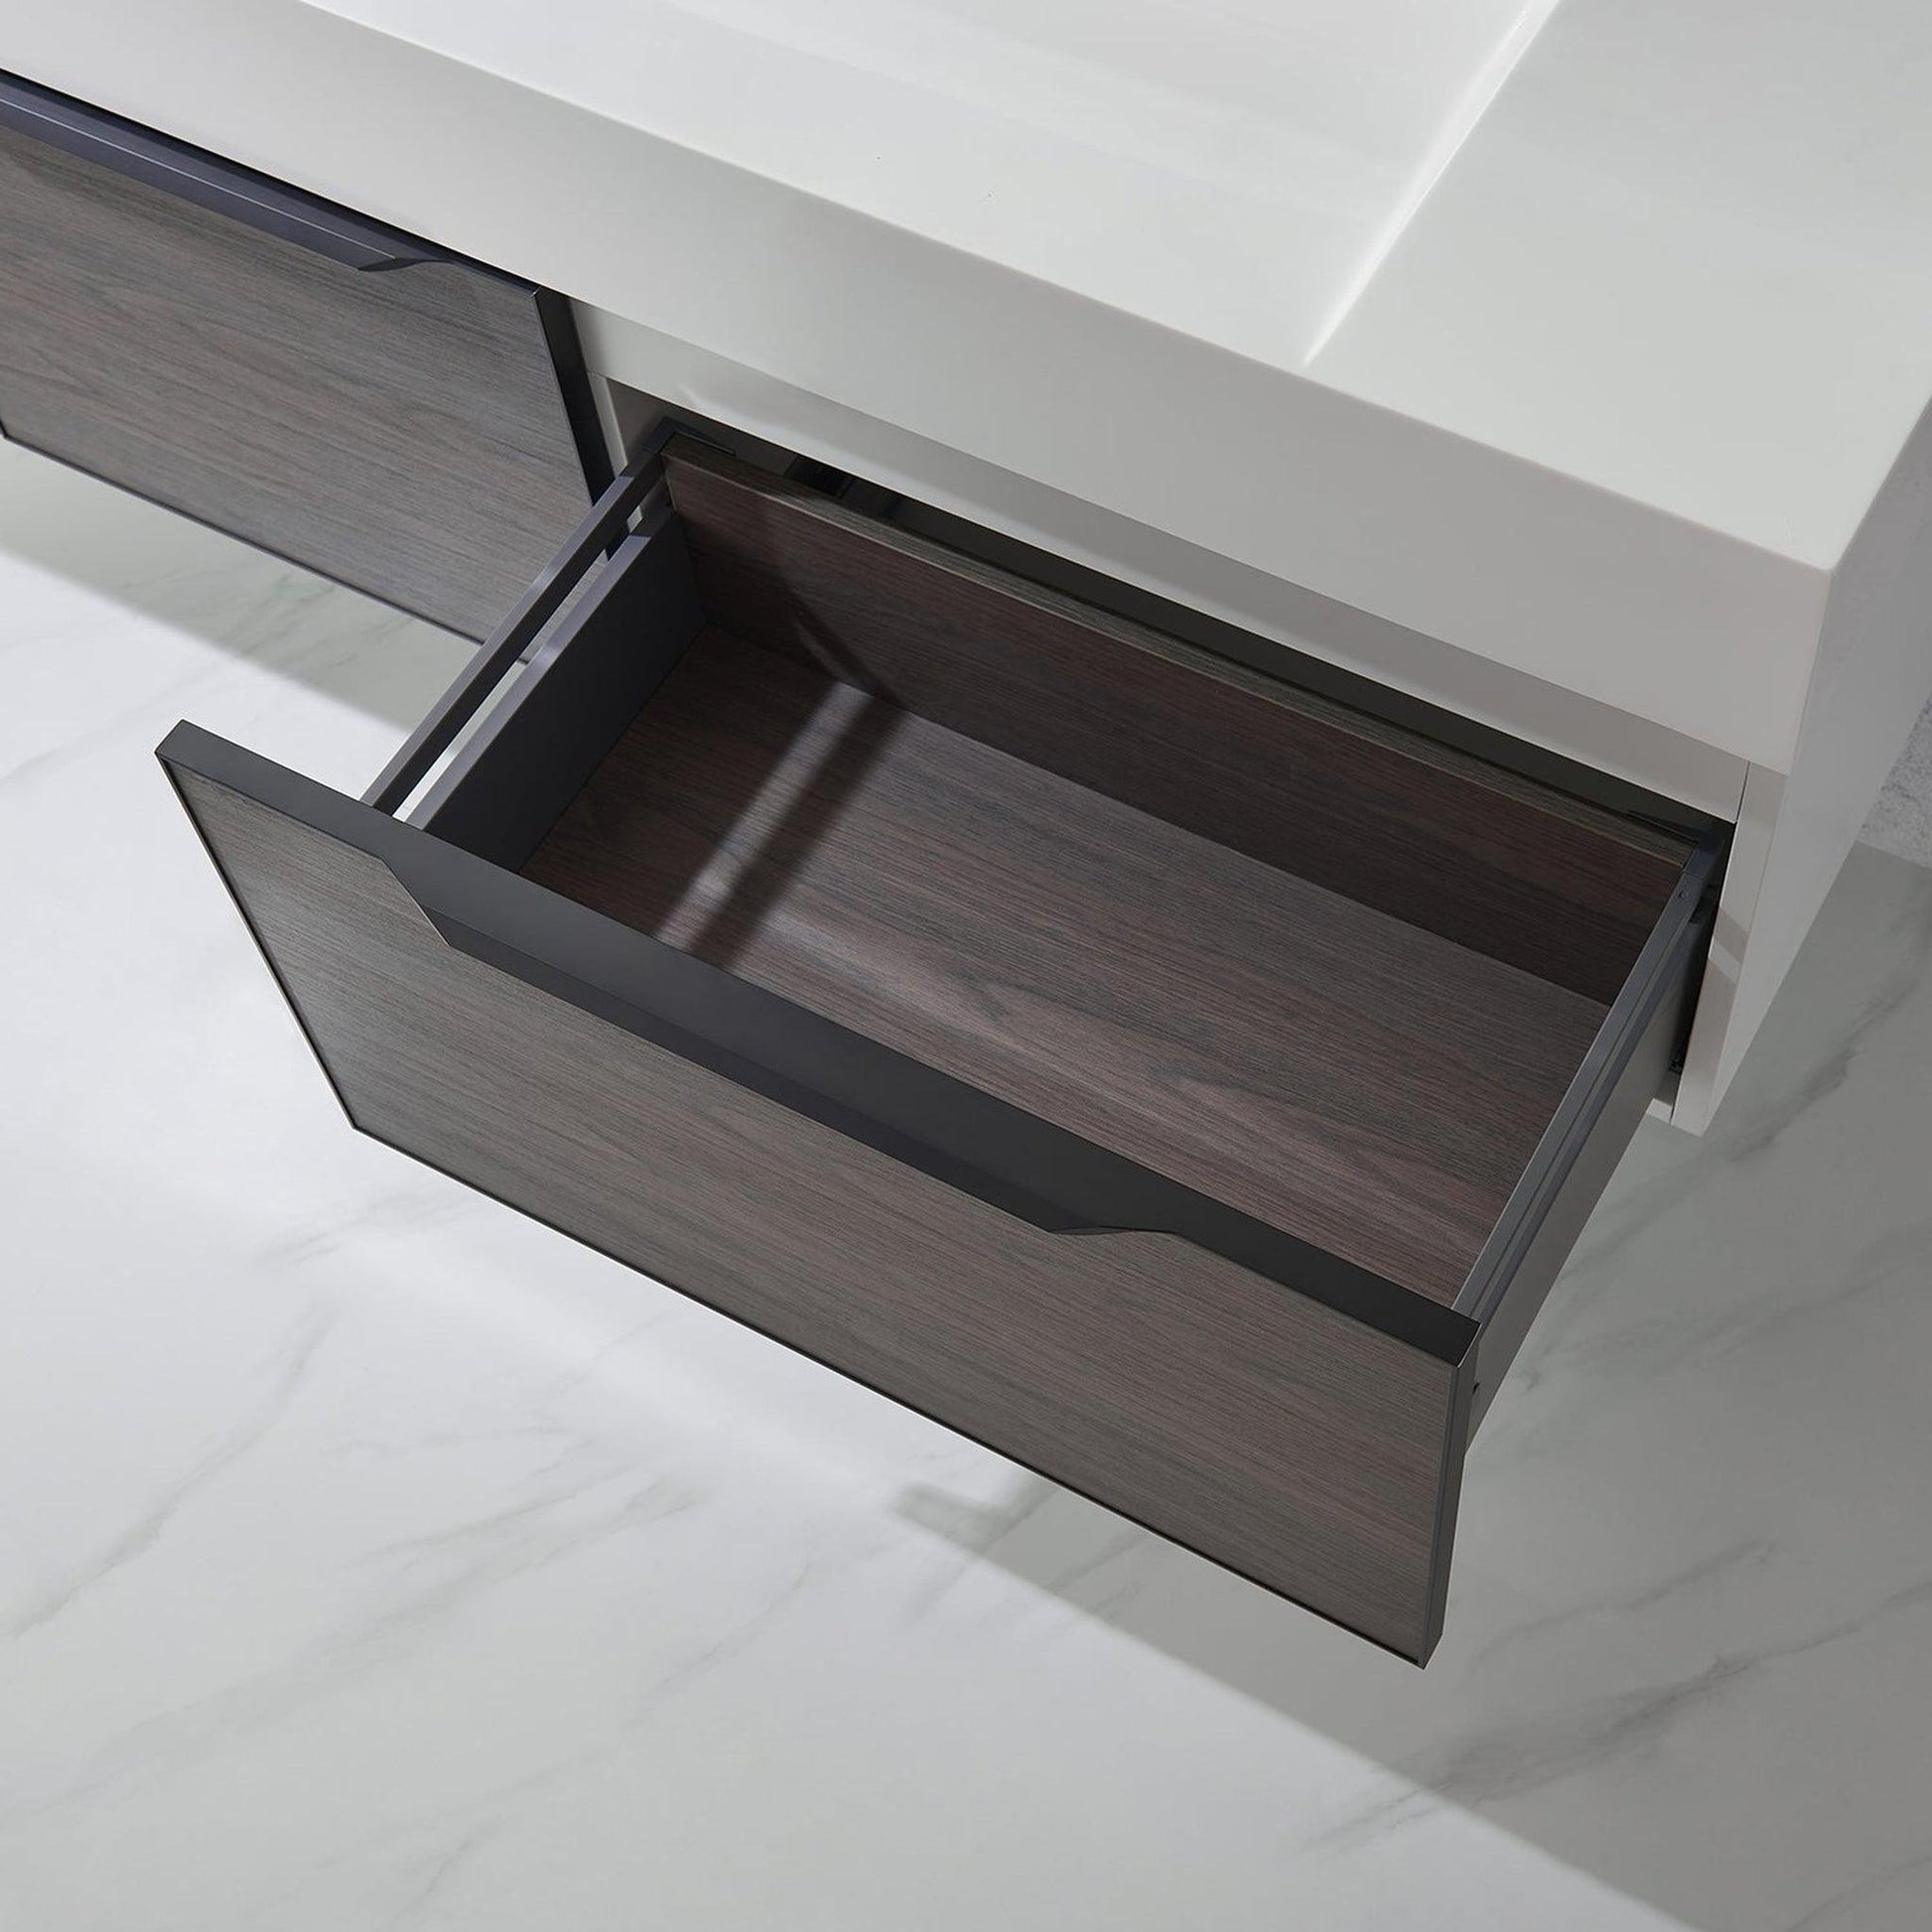 Vinnova Vegadeo 72" Double Sink Bath Vanity In Suleiman Oak Finish With White One-Piece Composite Stone Sink Top And Mirror